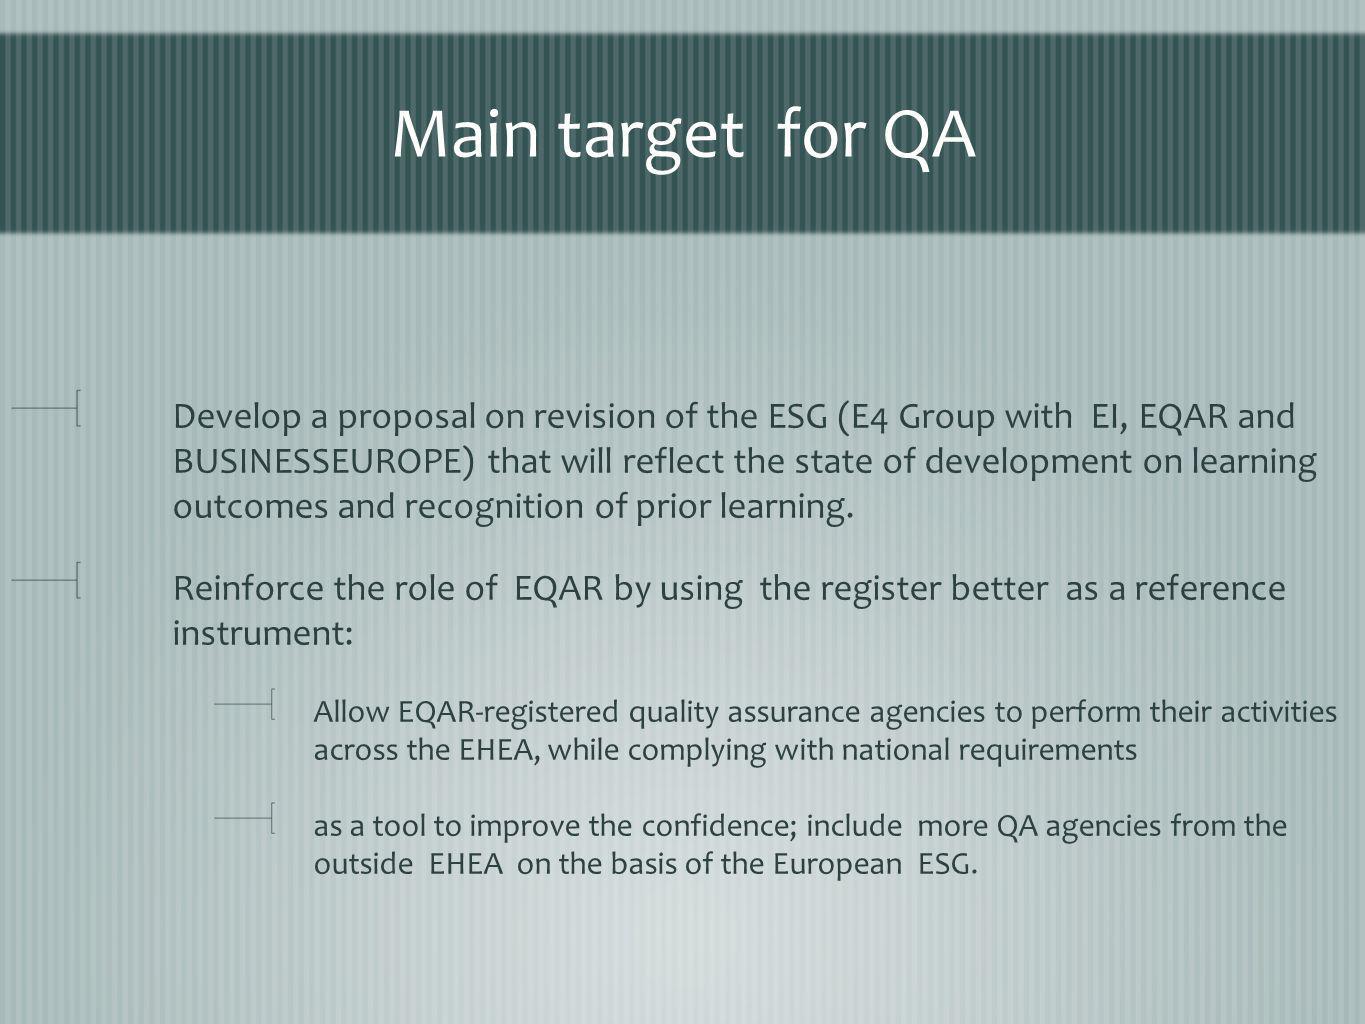 Main target for QA Develop a proposal on revision of the ESG (E4 Group with EI, EQAR and BUSINESSEUROPE) that will reflect the state of development on learning outcomes and recognition of prior learning.